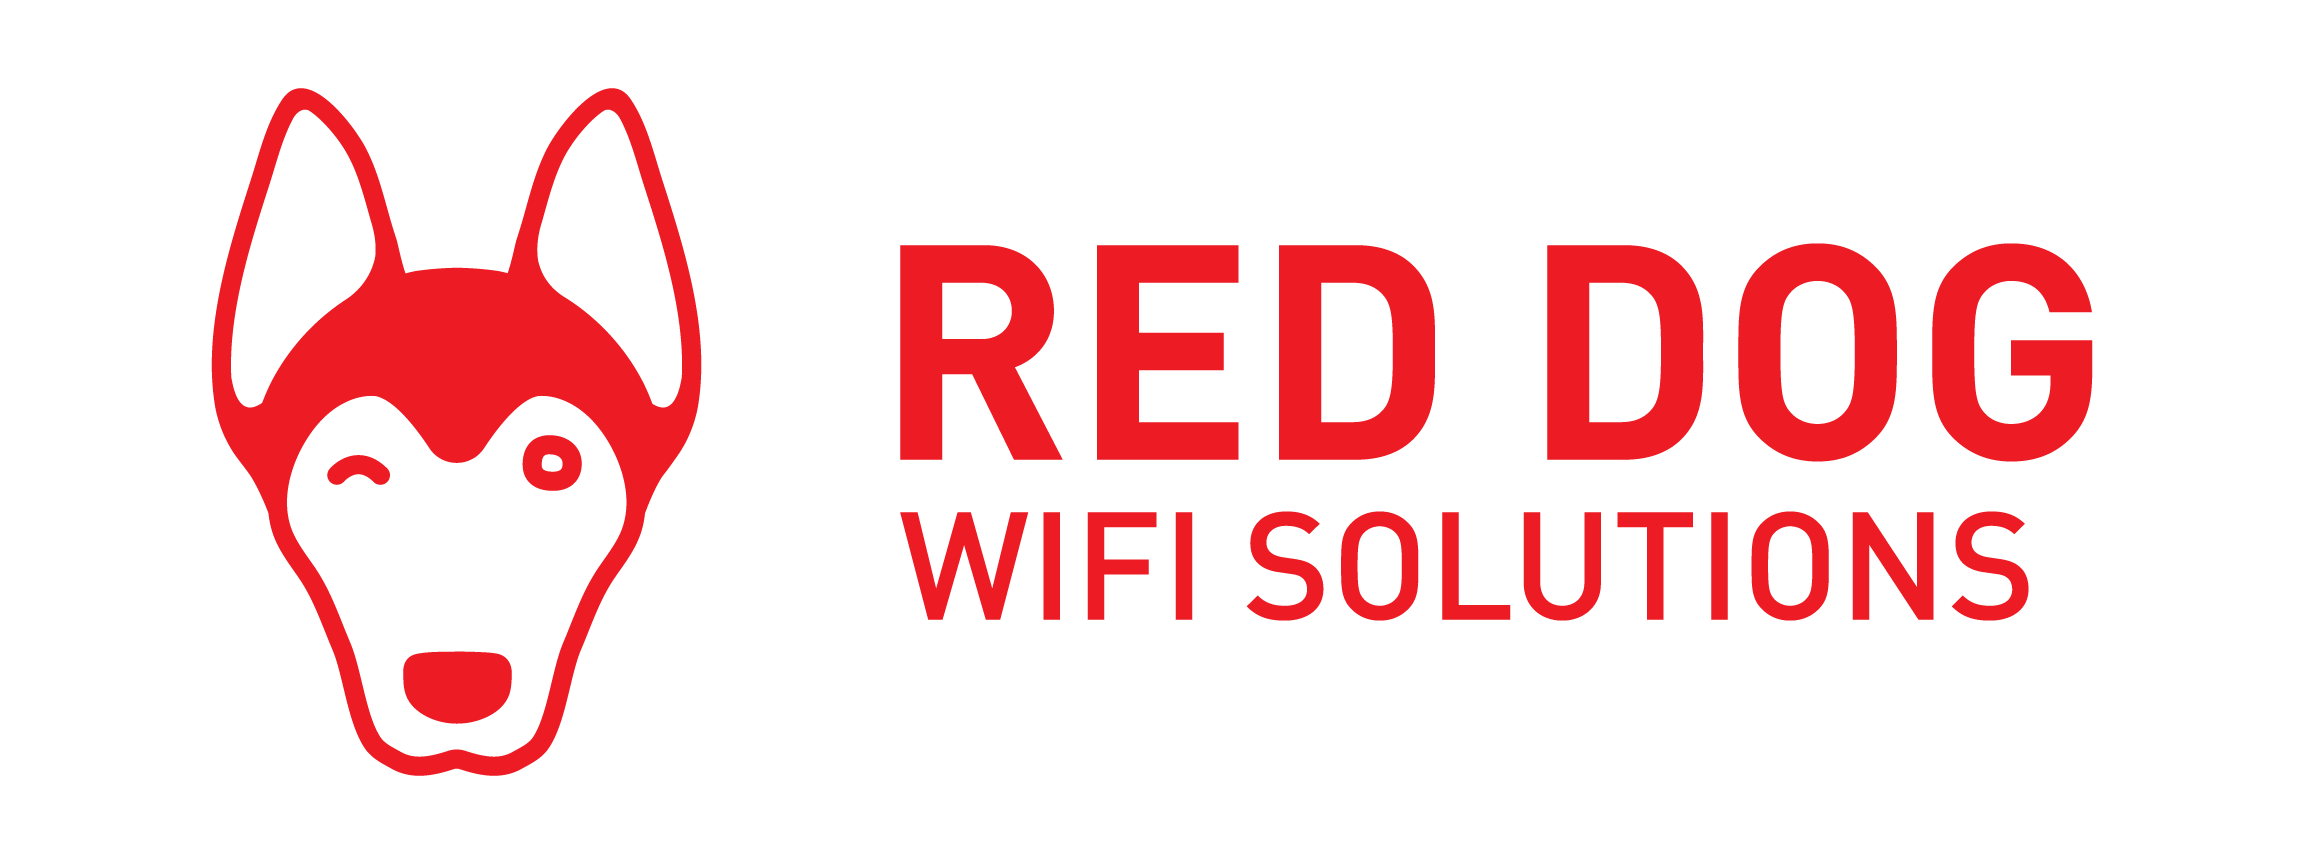 Companies with Red Dog Logo - WiFi Companies Columbus Ohio - Guest WiFi Installers - Red Dog WiFi